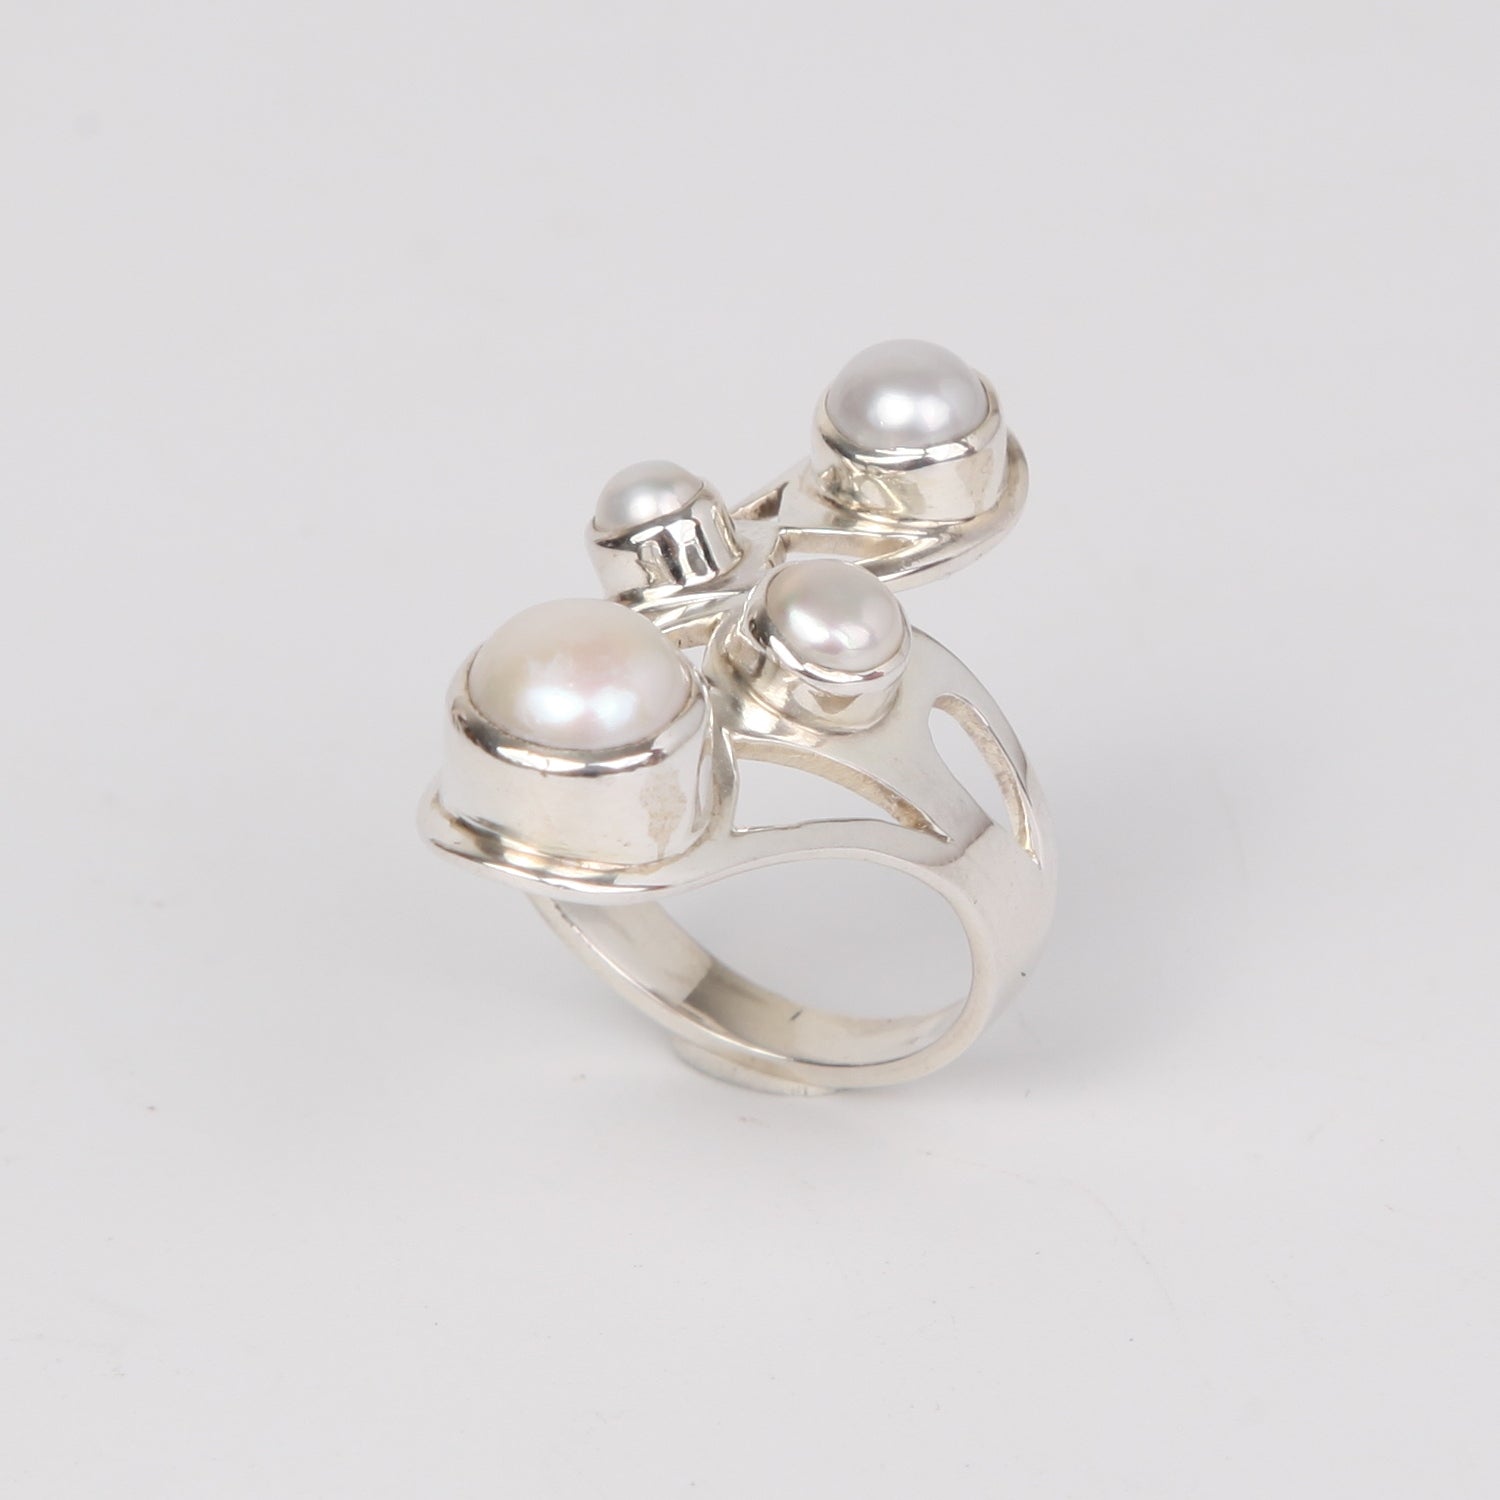 Detailed Sterling Silver Ring with Fresh Water Pearls